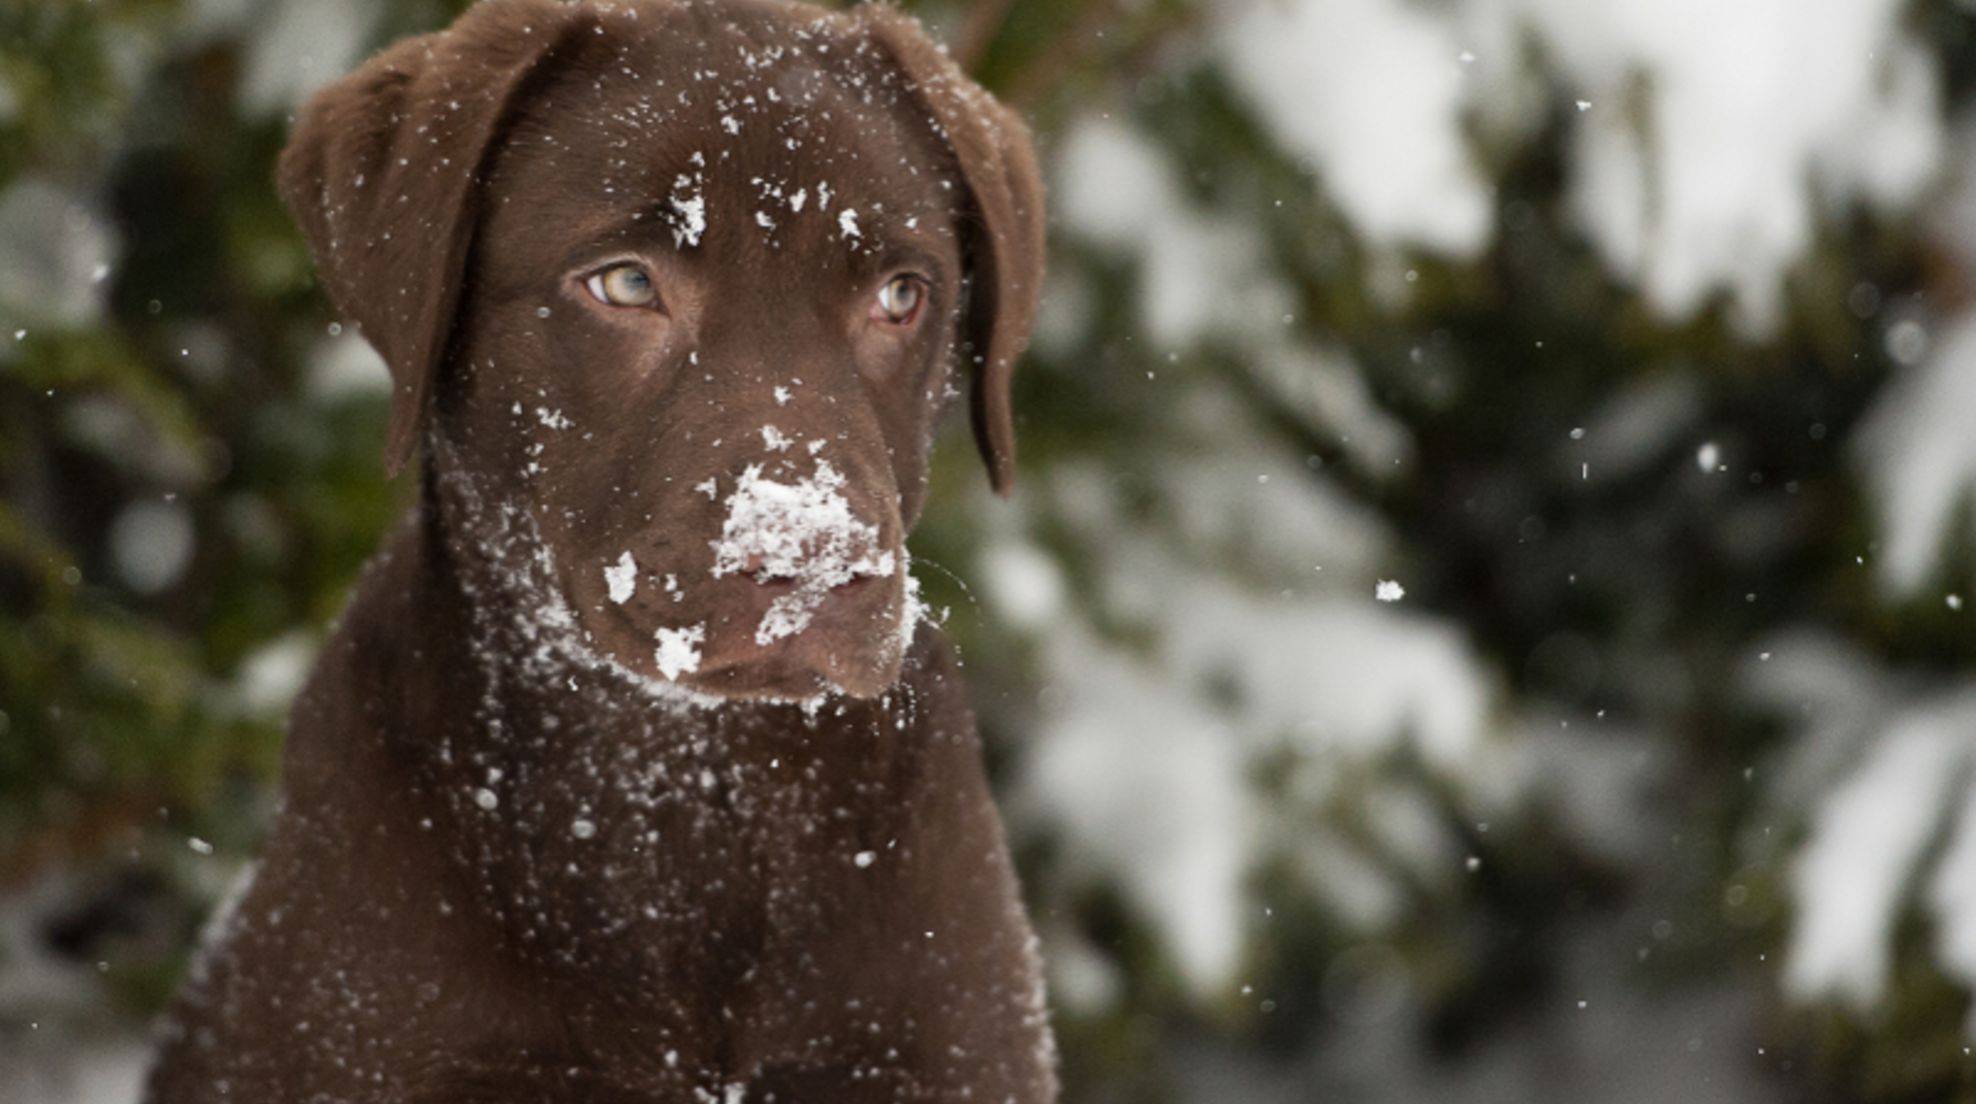 Dog nutrition in winter: What is important?